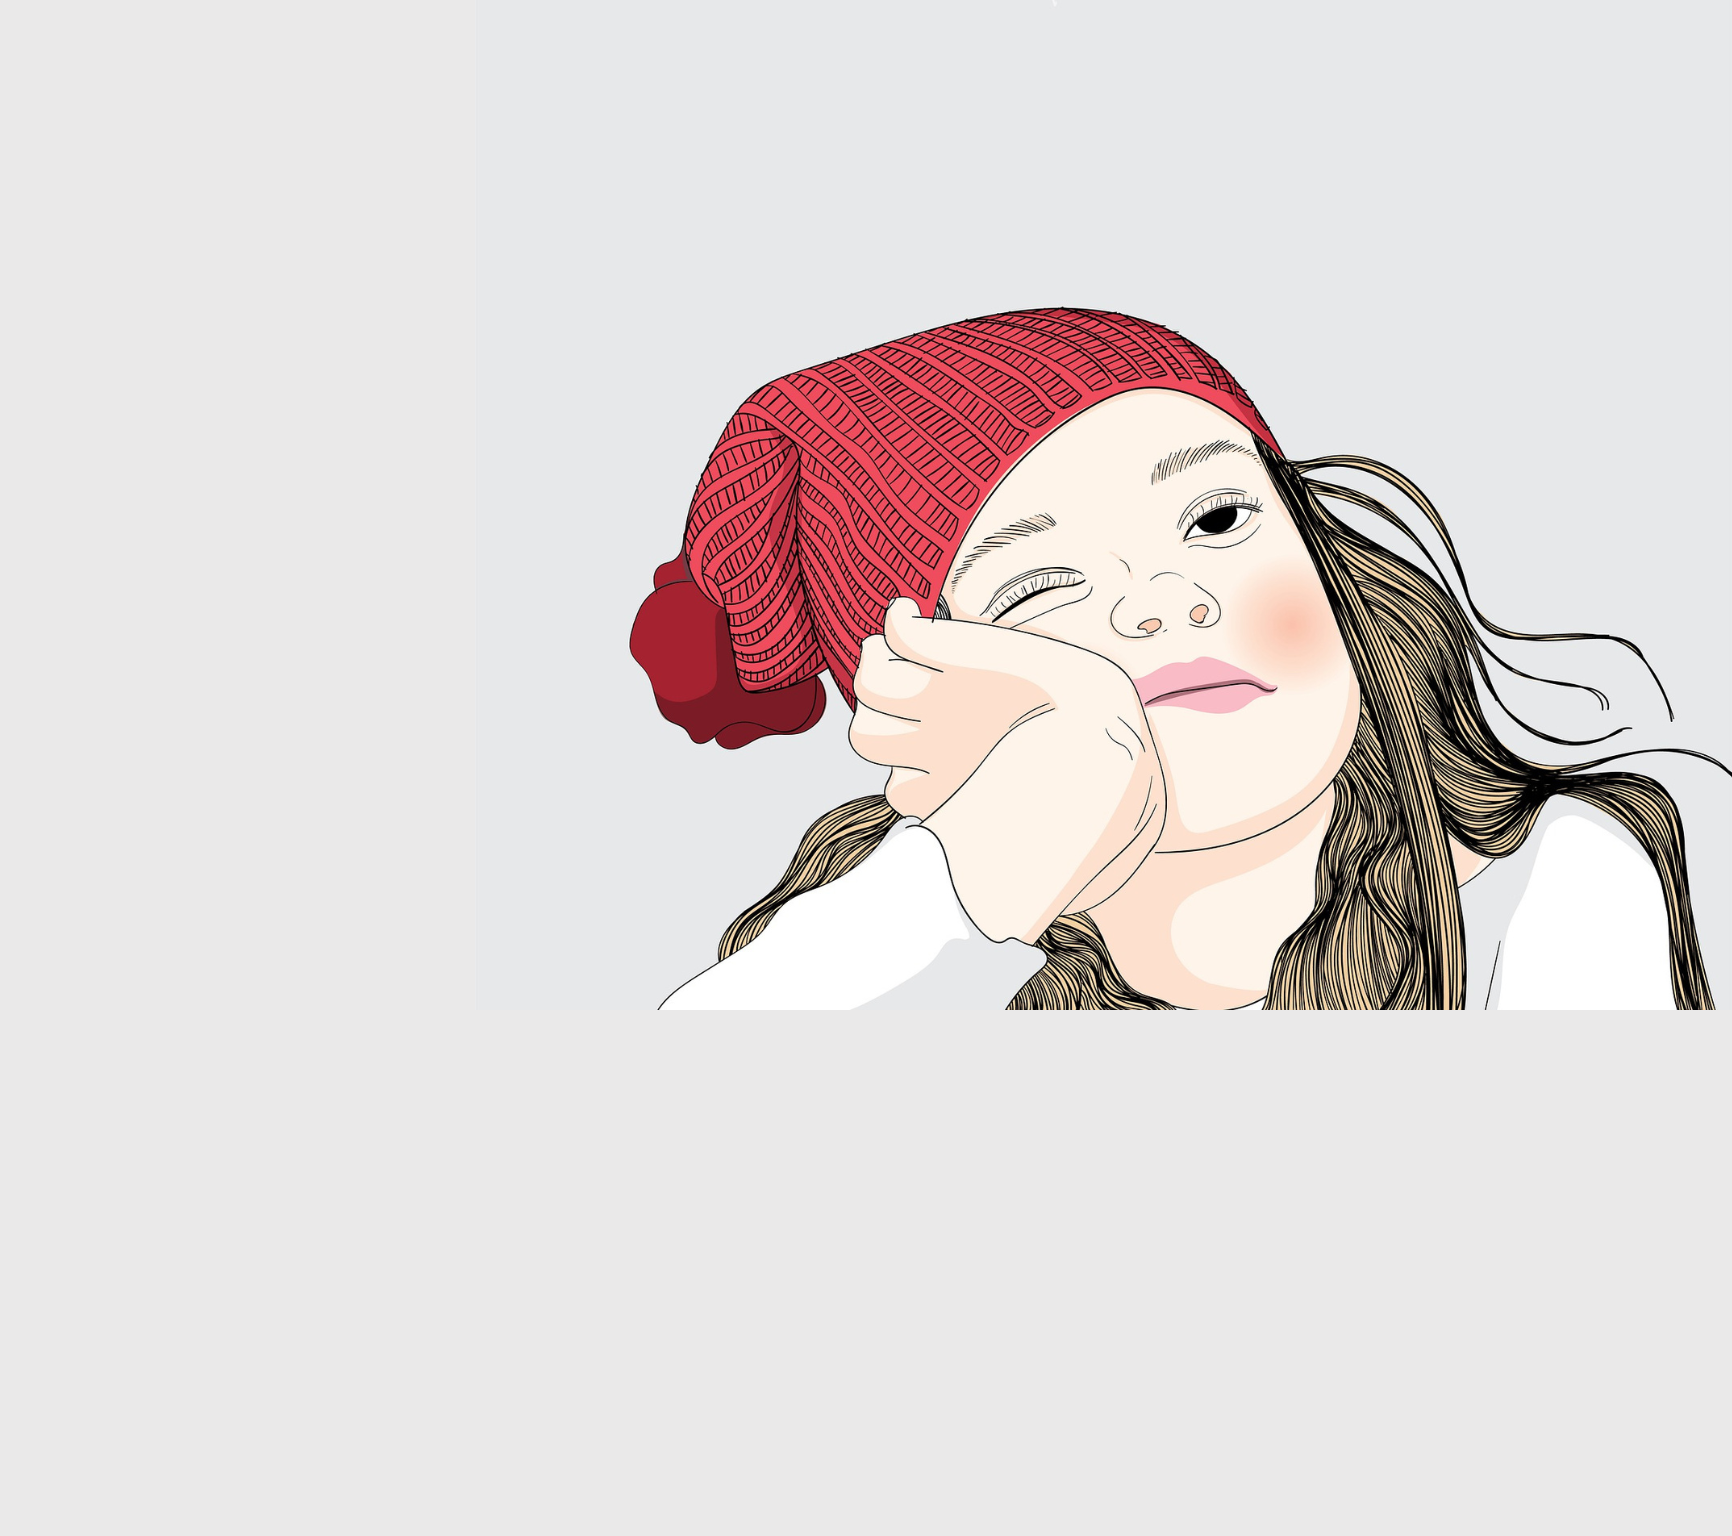 illustration of girl in a red beanie with her face in one hand, looking bored/tired